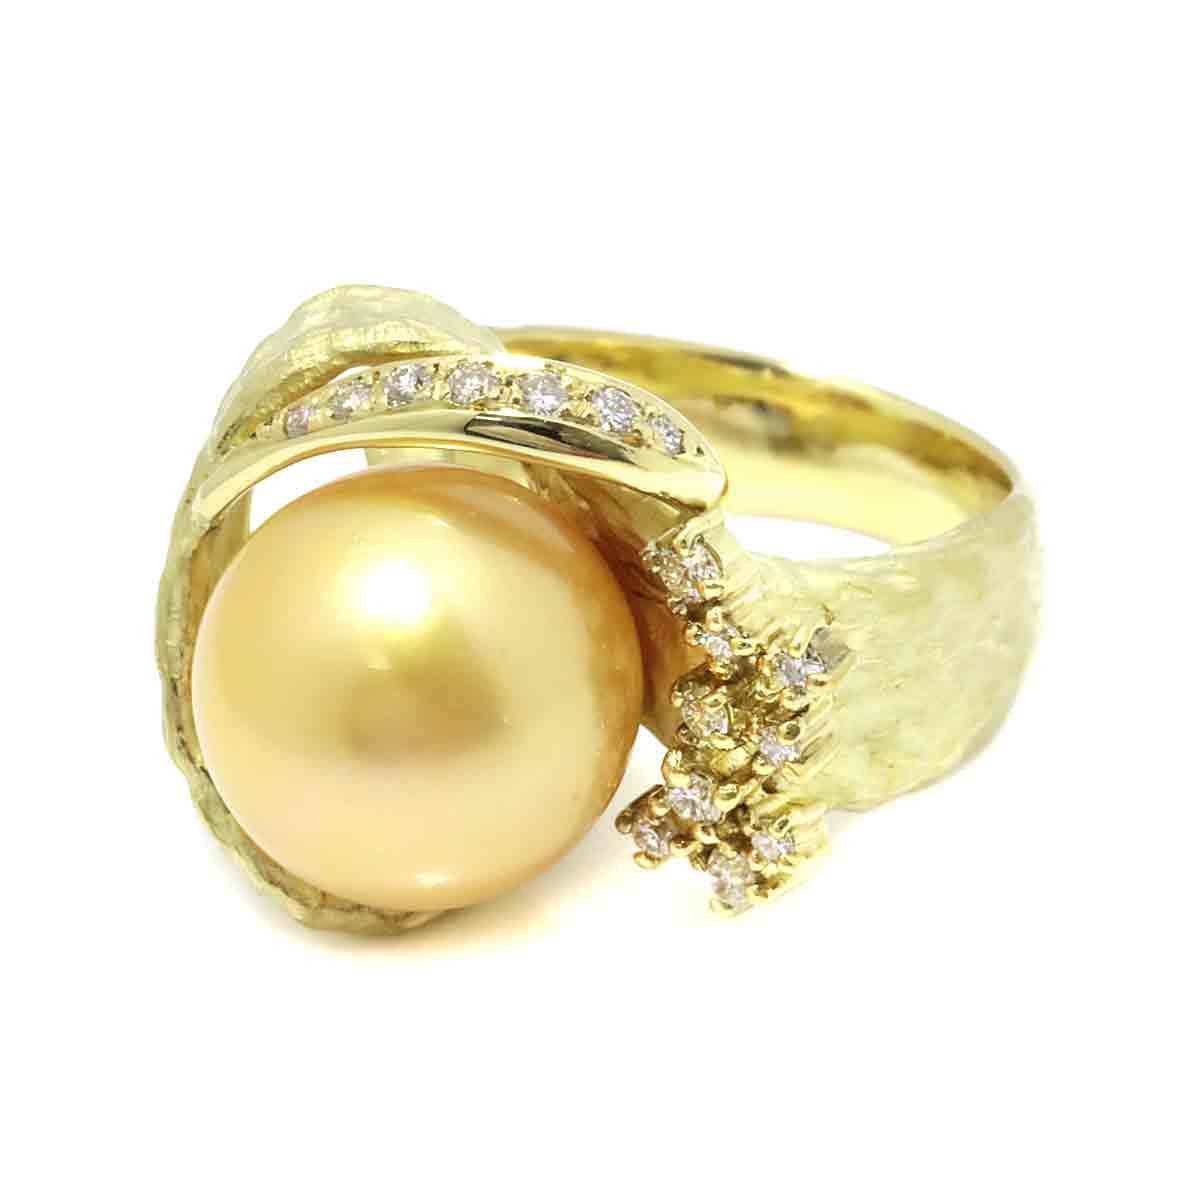  ring 12 number White Butterfly pearl 13.3mm diamond 0.32ct K18 YG yellow gold 750 pearl ring South Sea pearl Ring 90203882